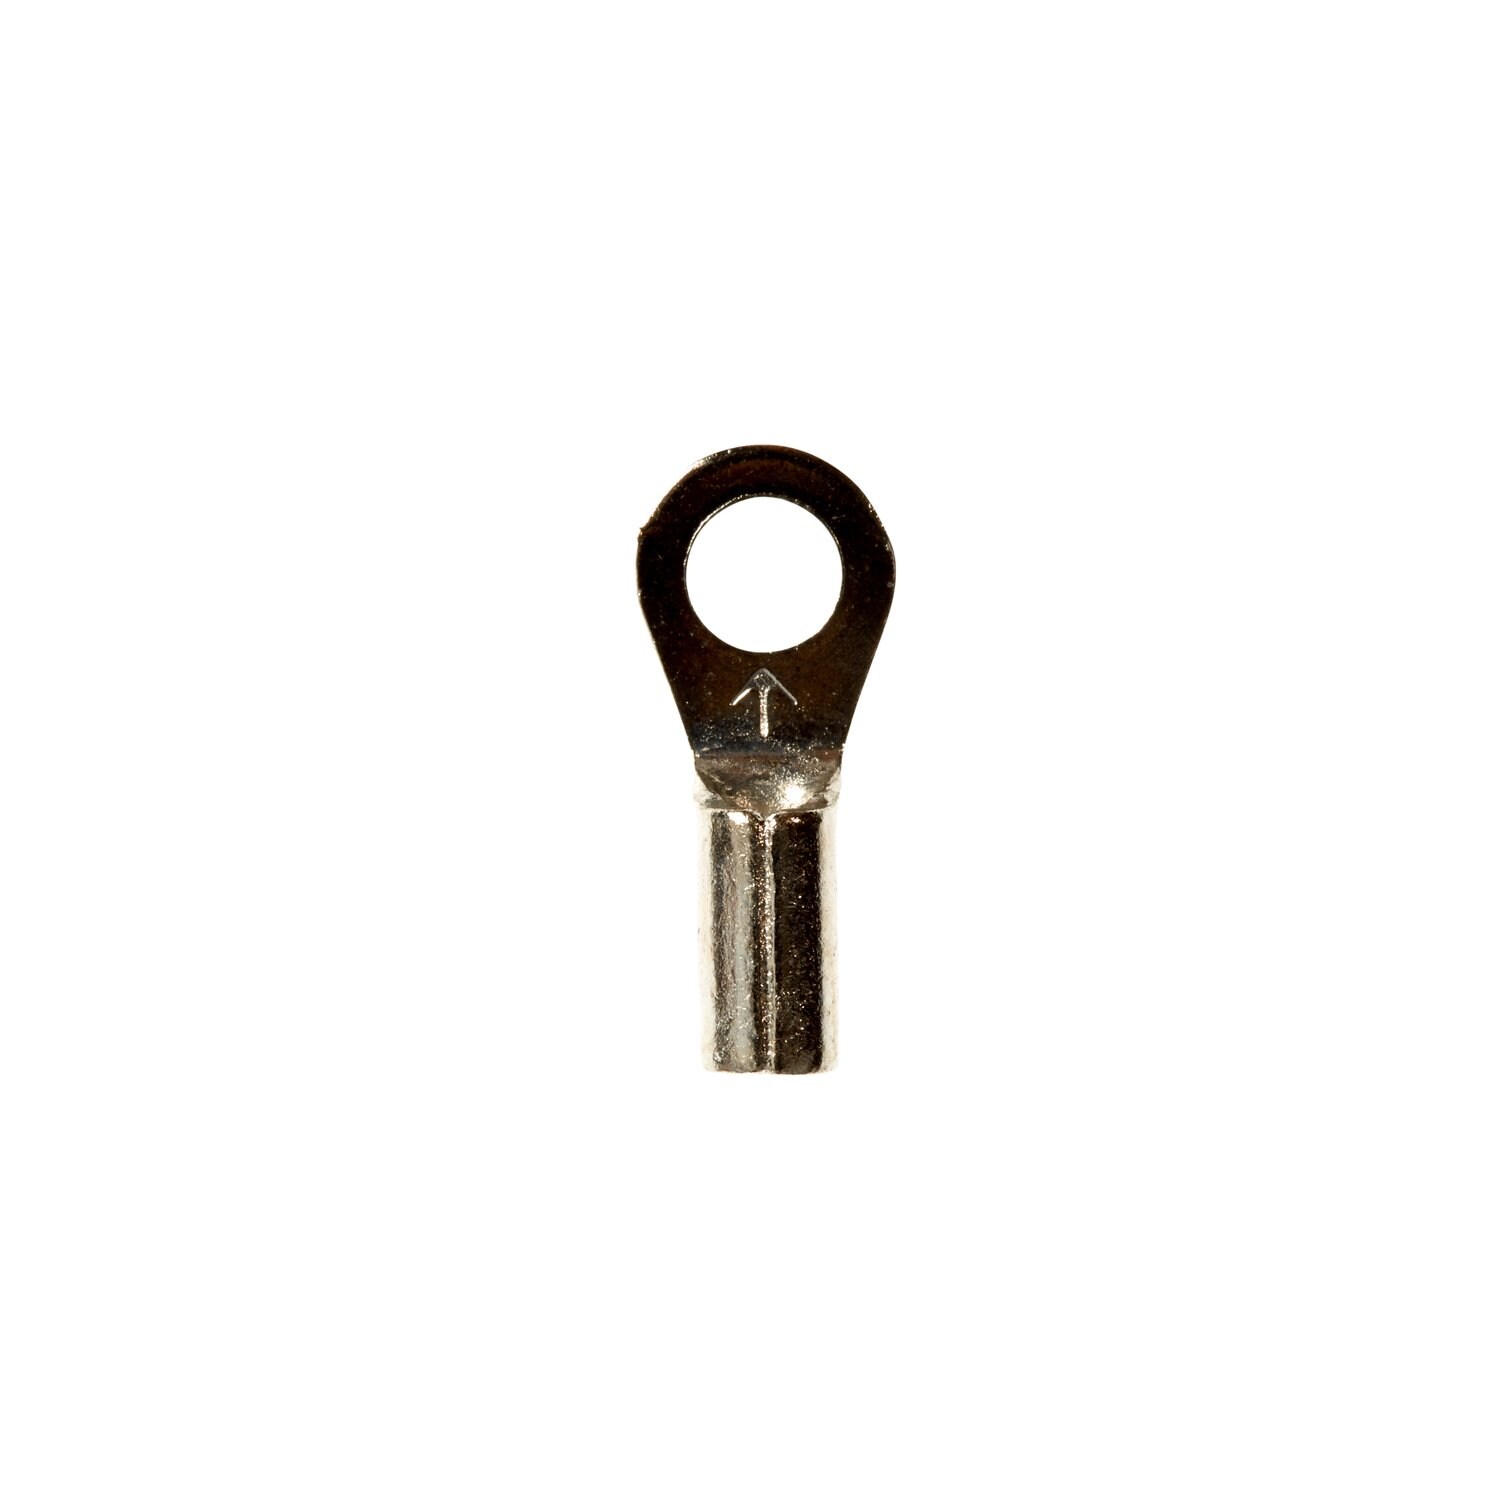 7010399912 - 3M Scotchlok Ring Non-Insulated, 100/bottle, M18-6R/SX, standard-style
ring tongue fits around the stud, 500/Case